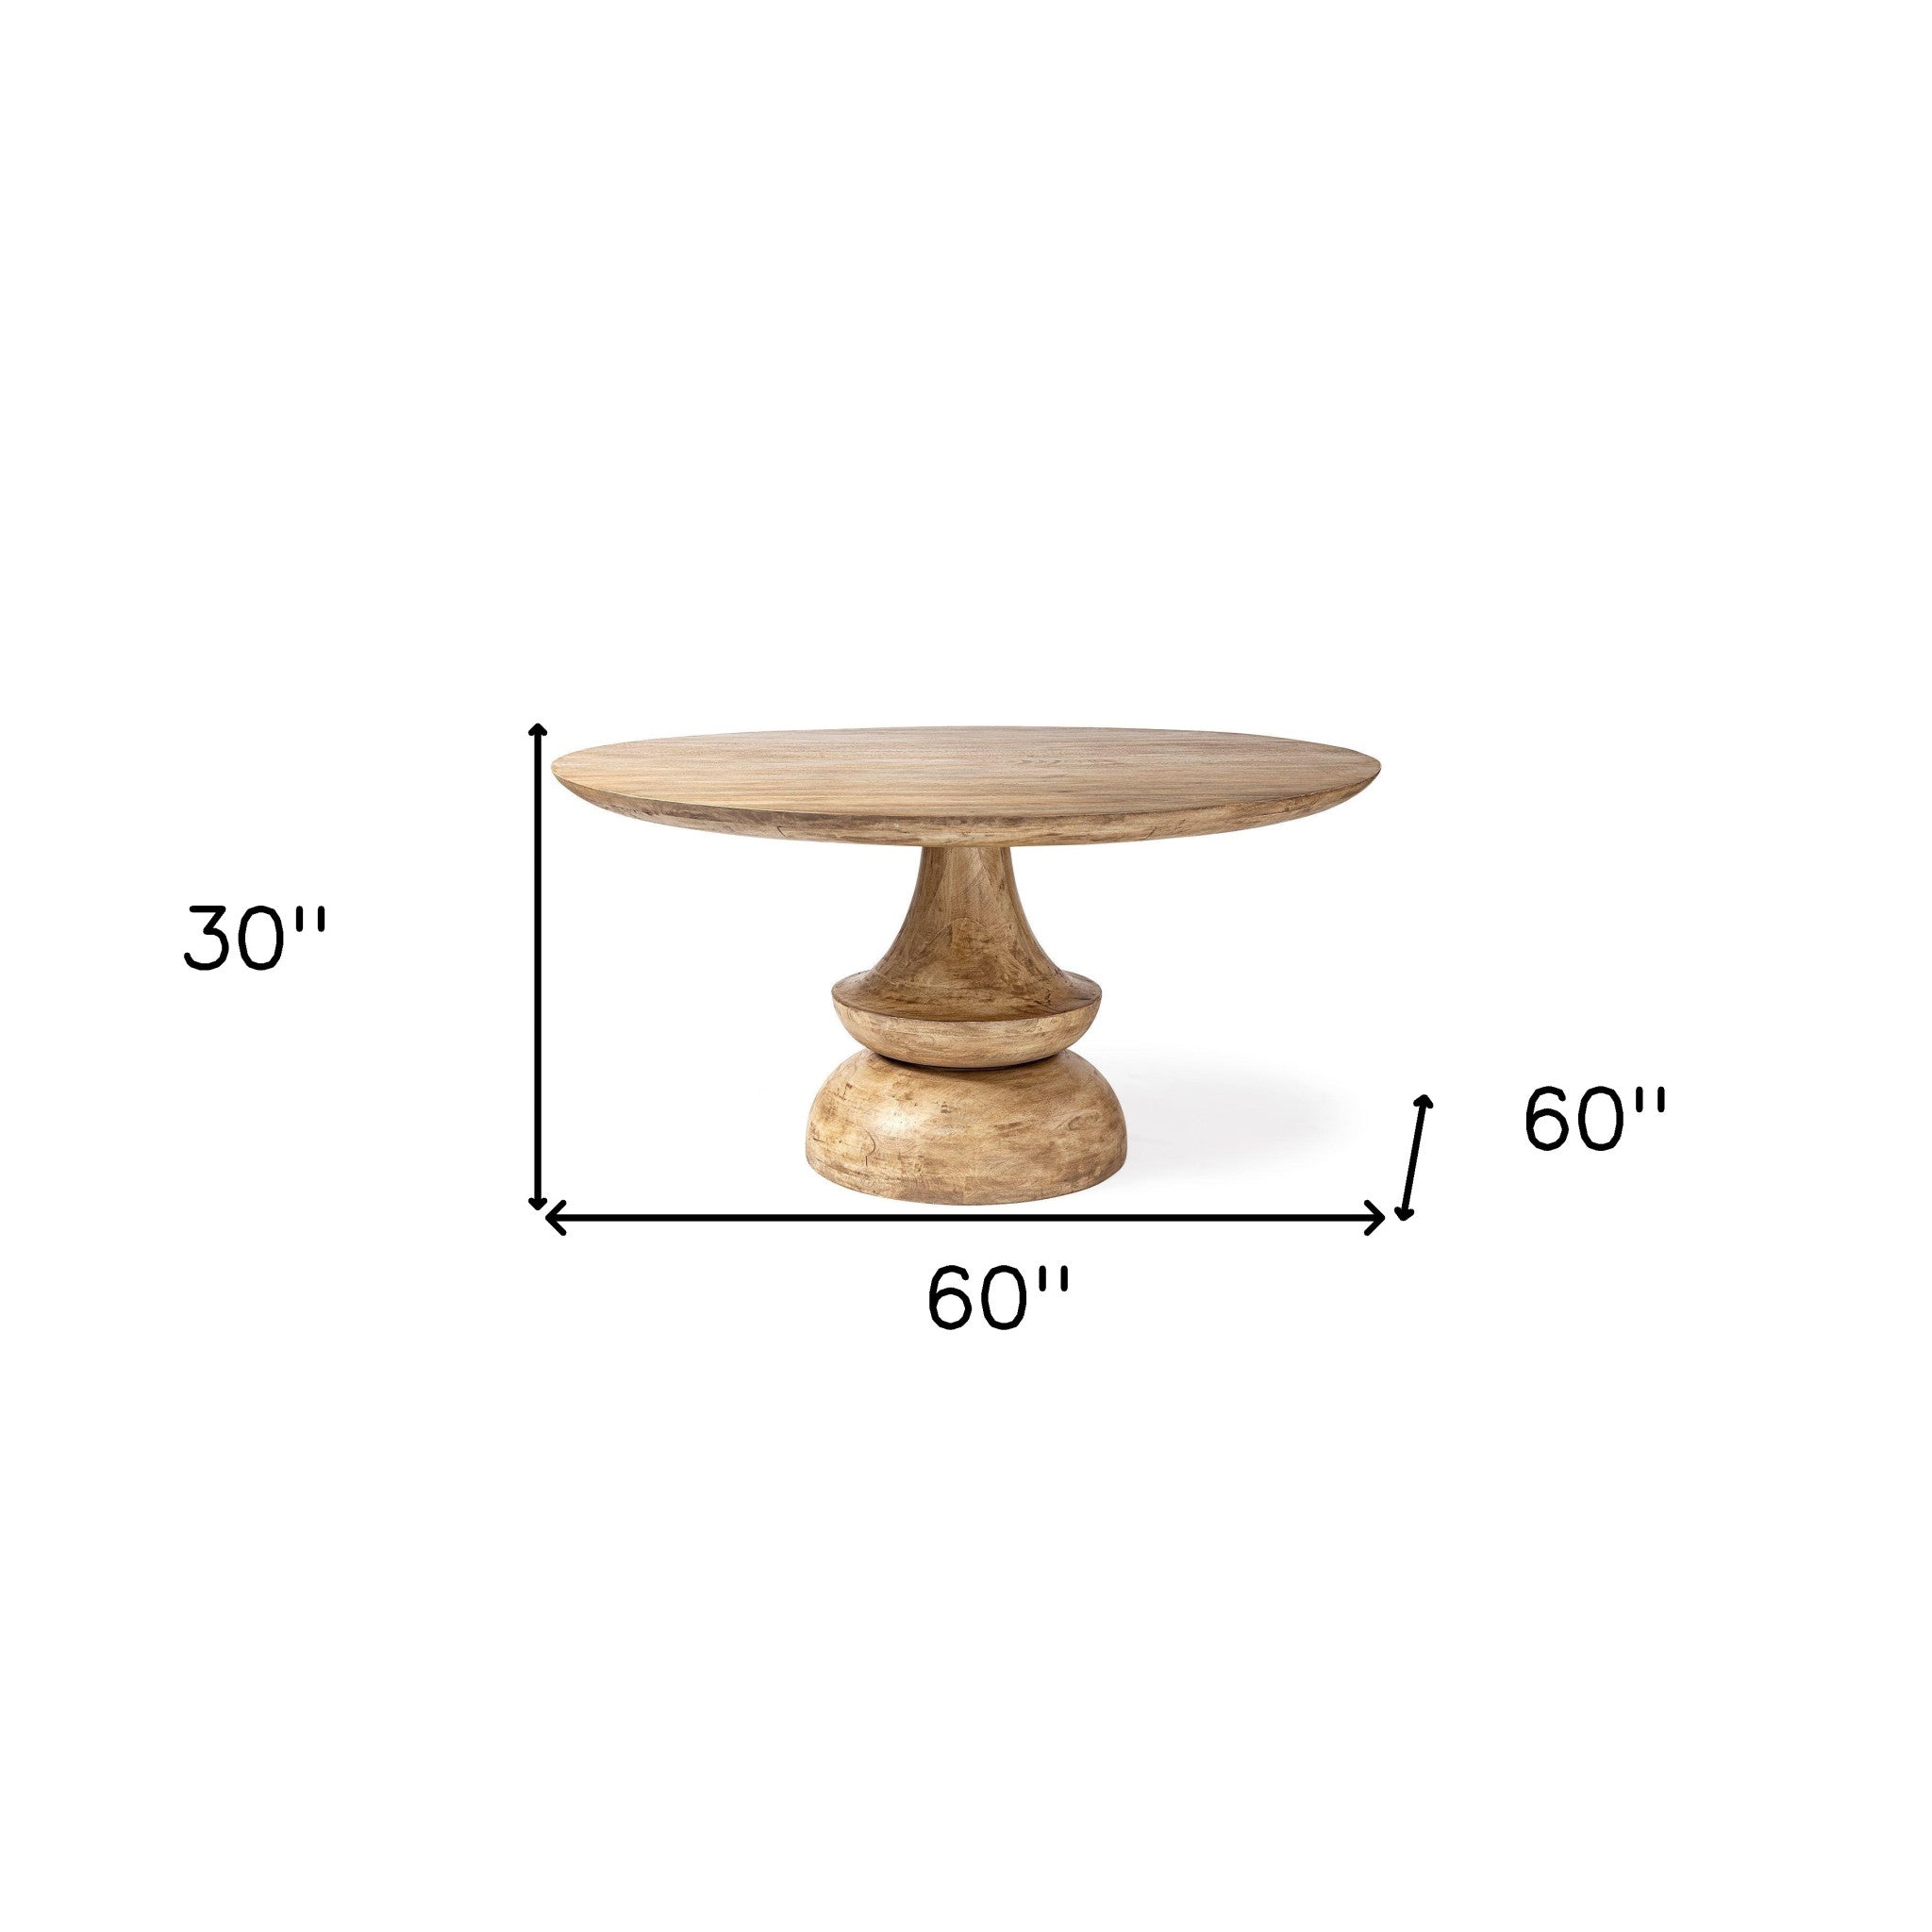 60" Round Blonde Solid Wood And Base Dining Table